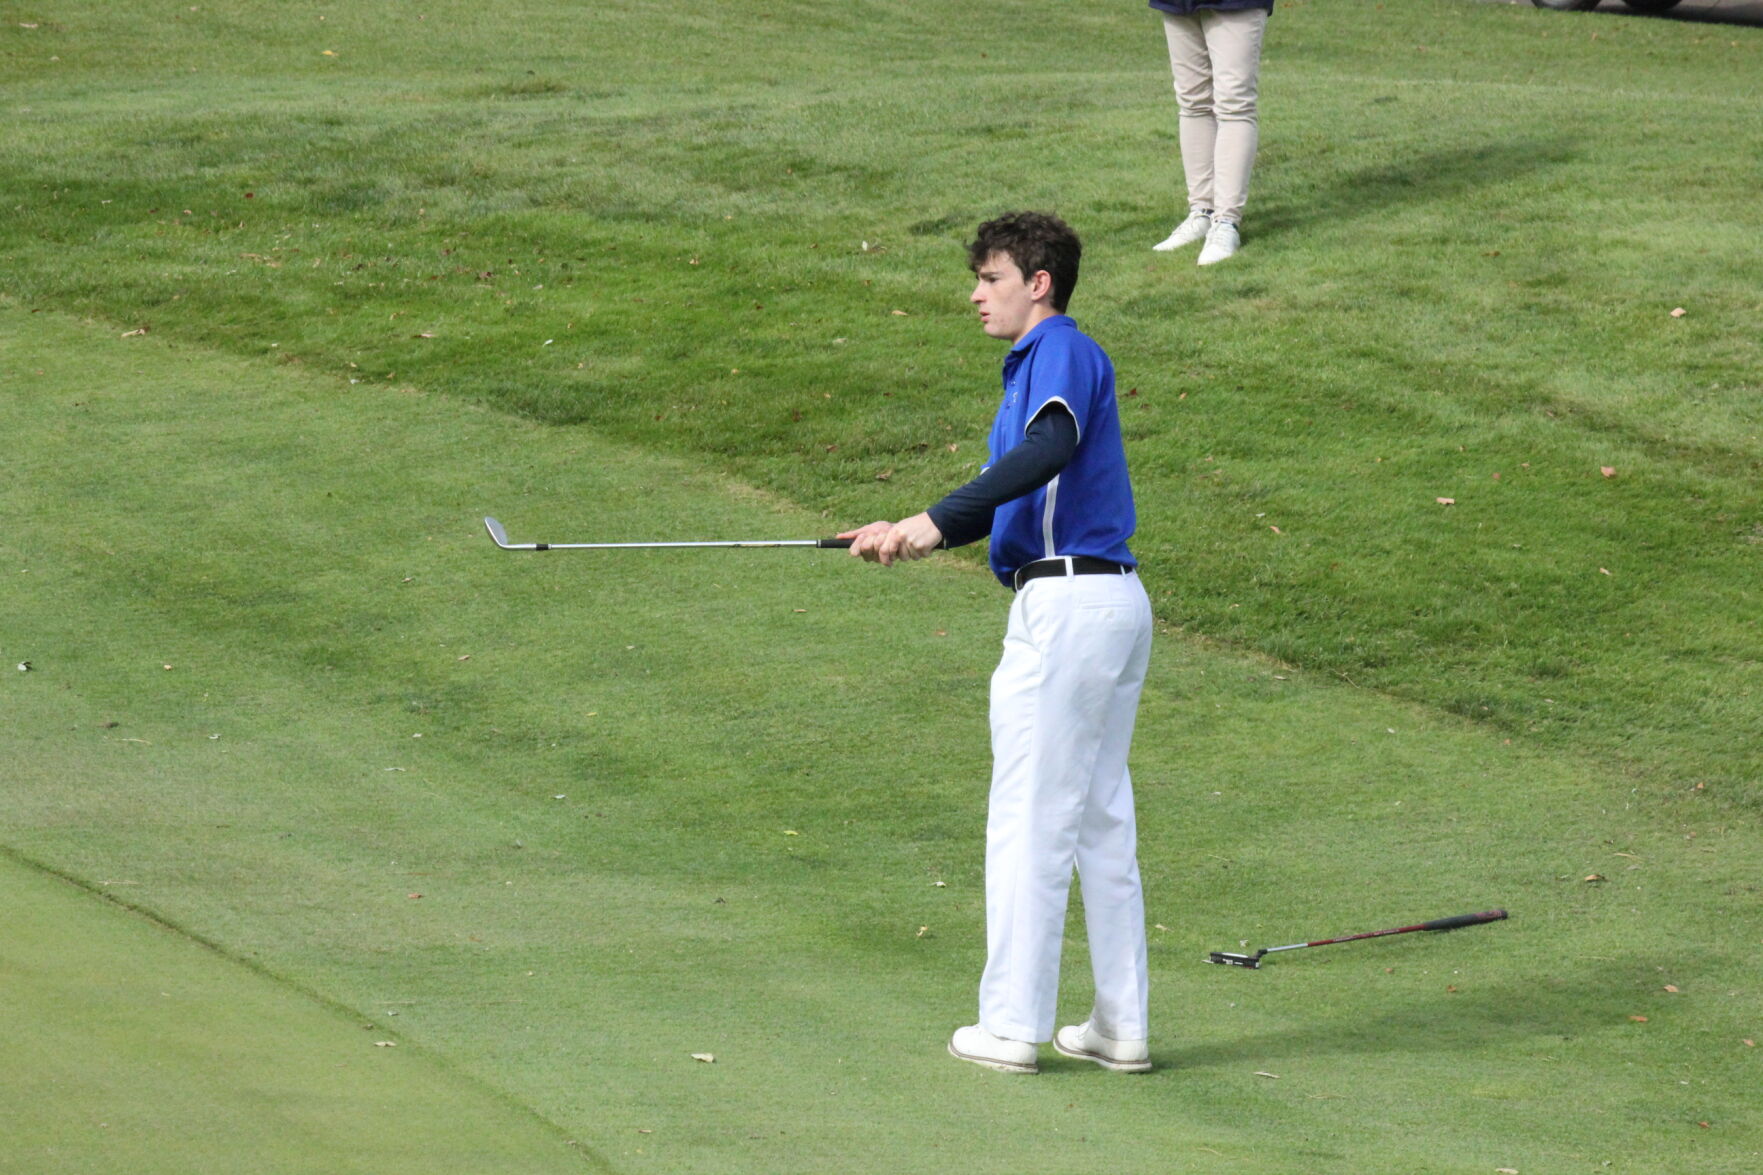 BOYS GOLF: Midlakes/Red Jacket's Nate Close ties for the Finger